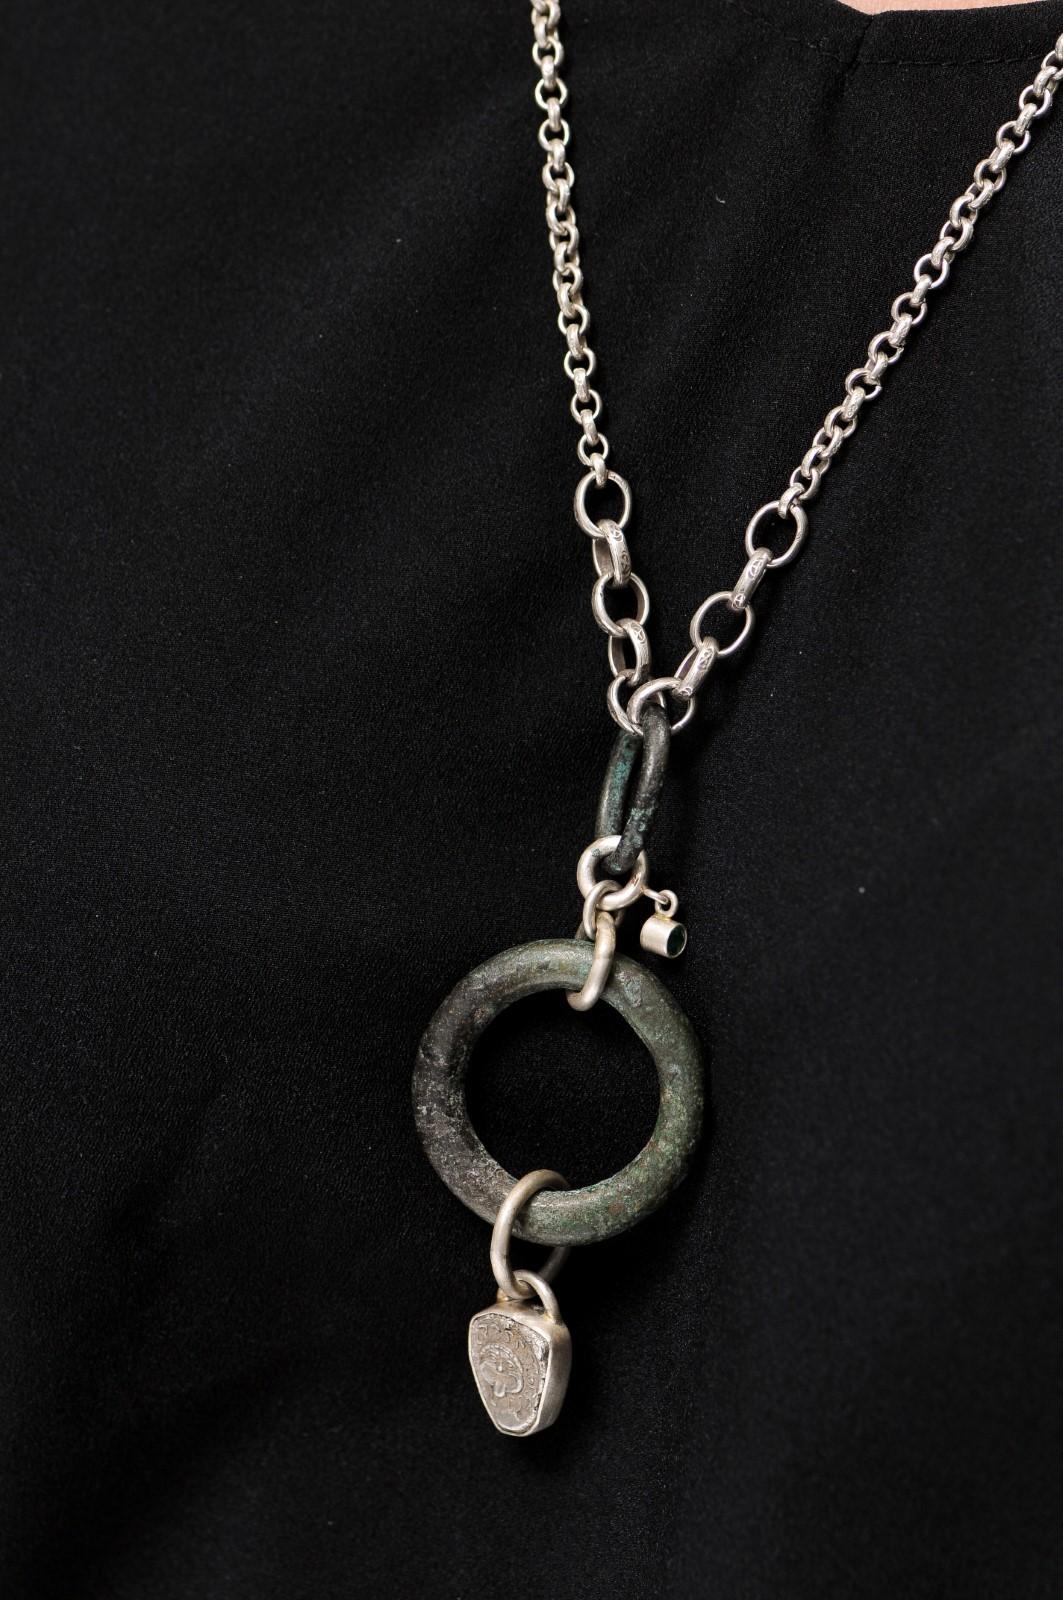 Tiered Pendant in bronze, w/emerald and drachm (coin) on Sterling Silver Chain For Sale 6